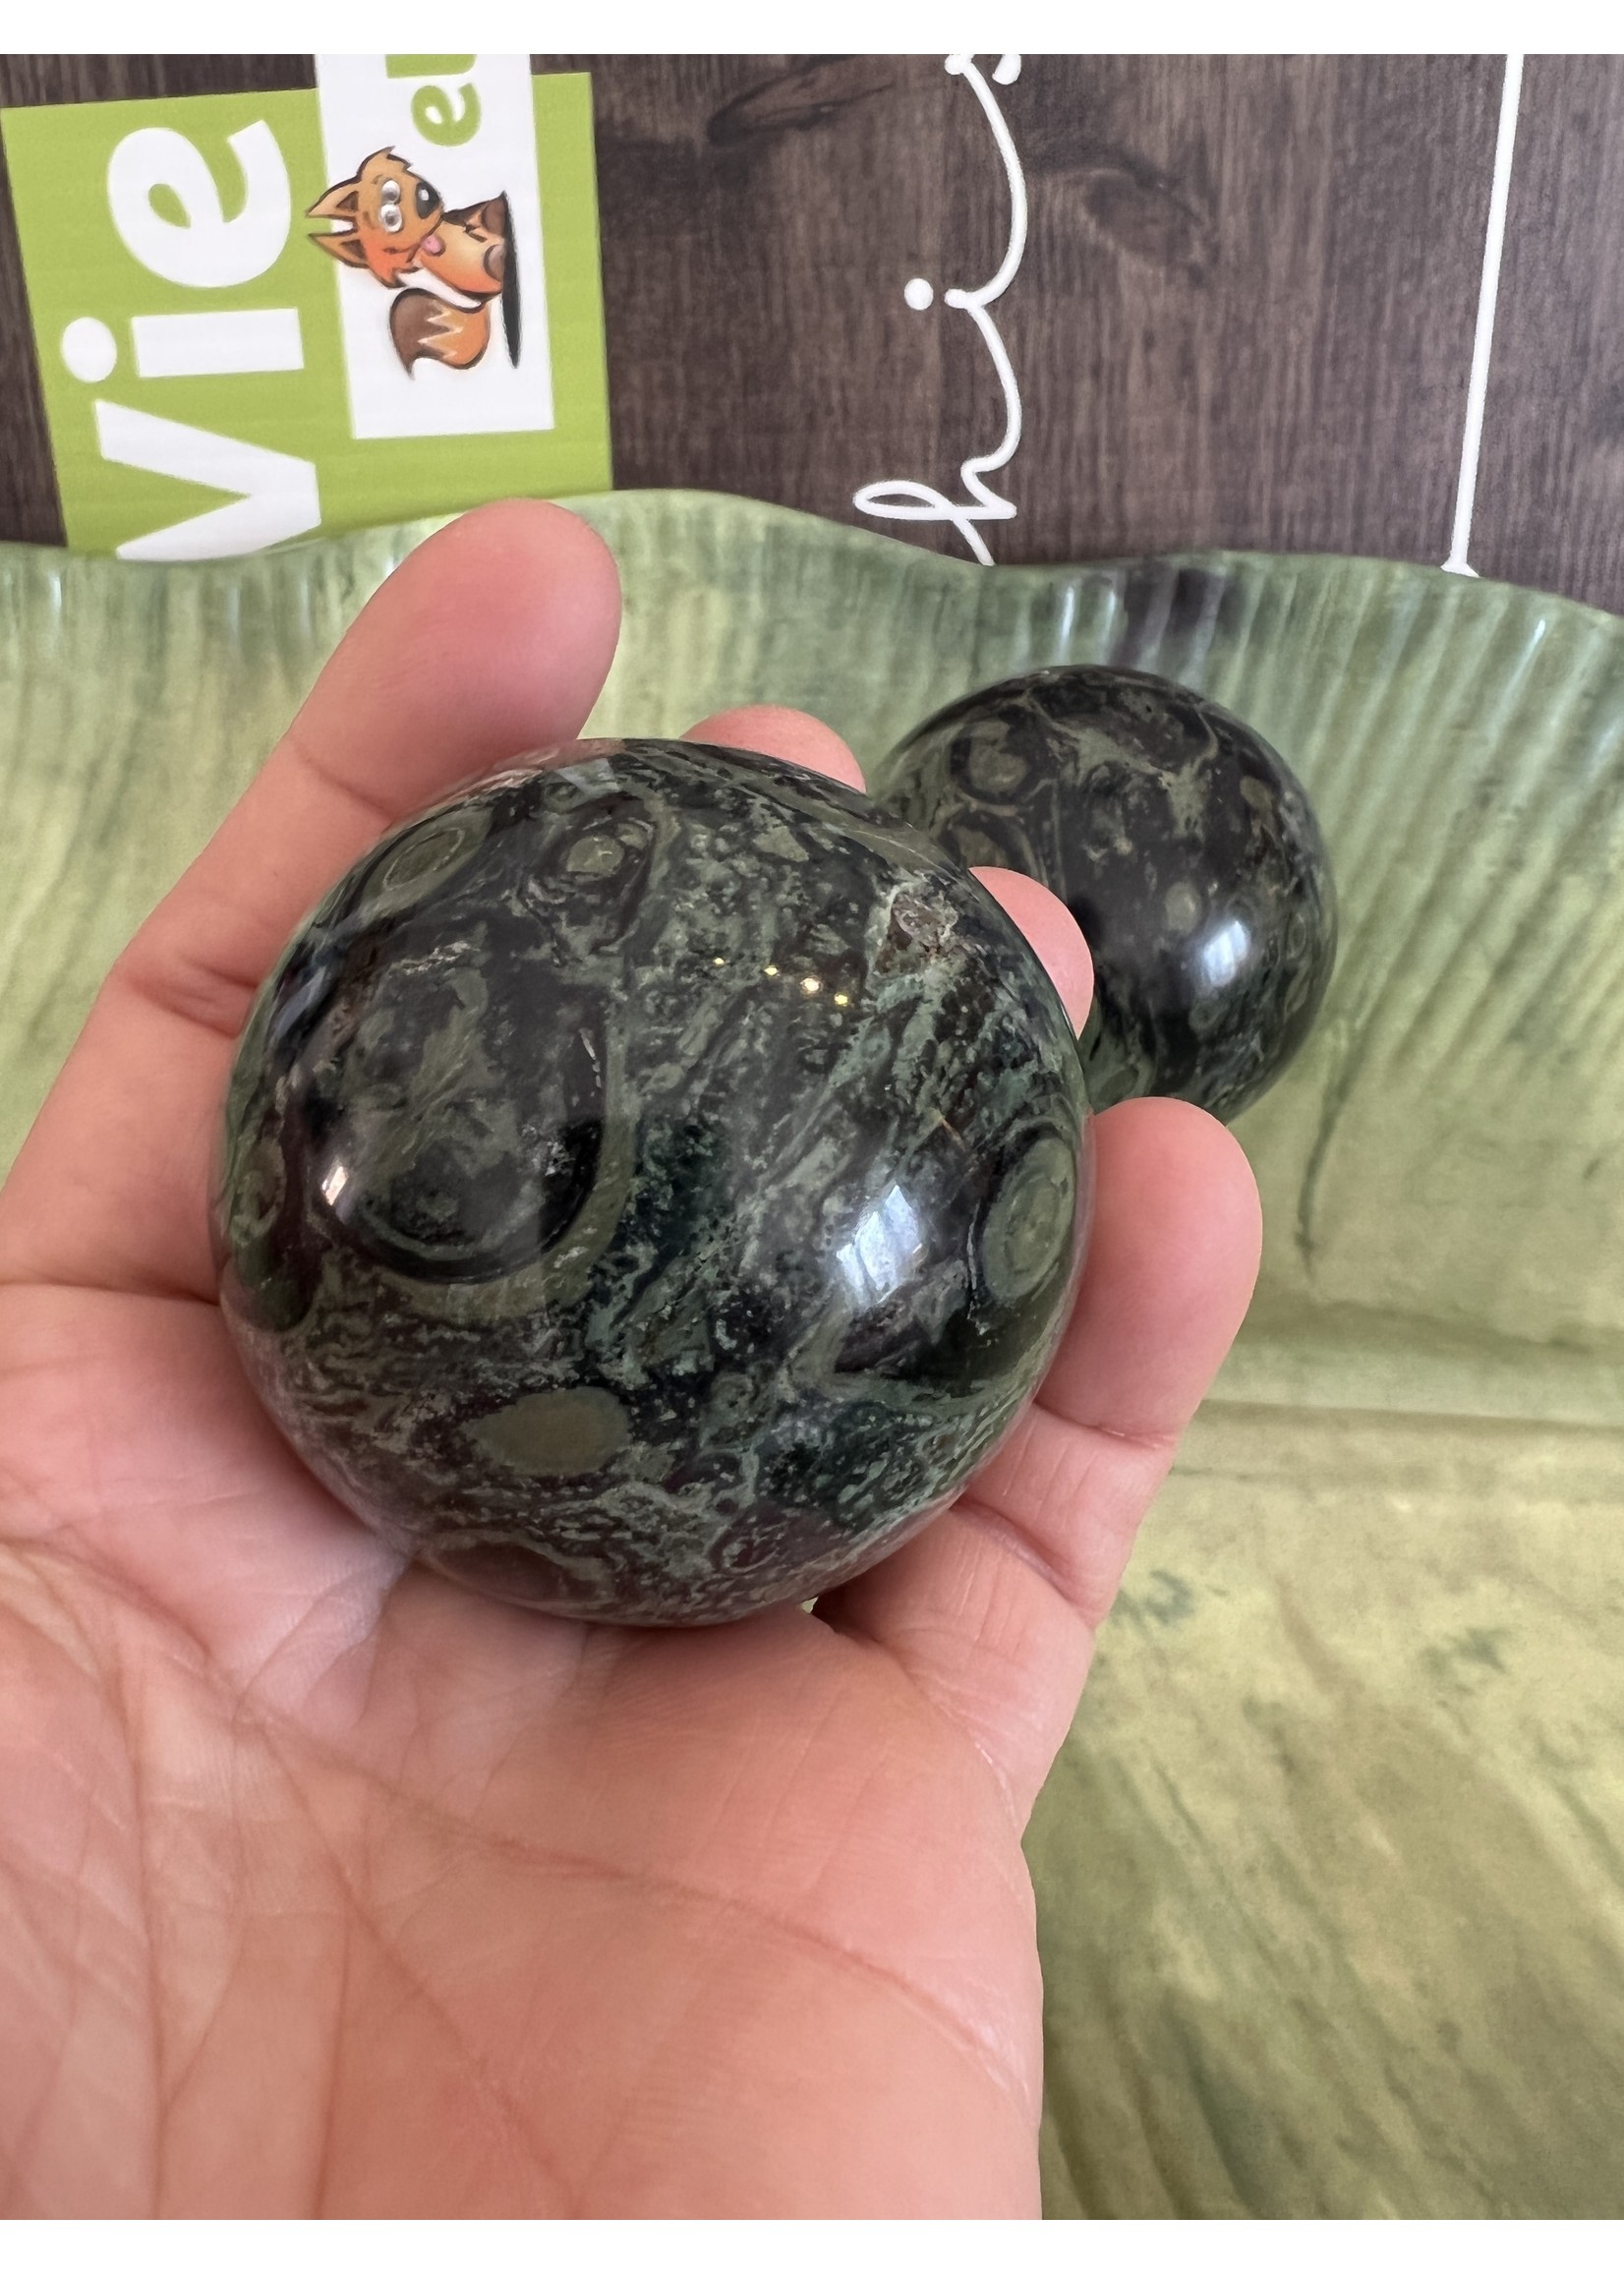 pretty sphere kambaba jasper, helps to enjoy the present moment without dwelling on the past or being anxious about the future